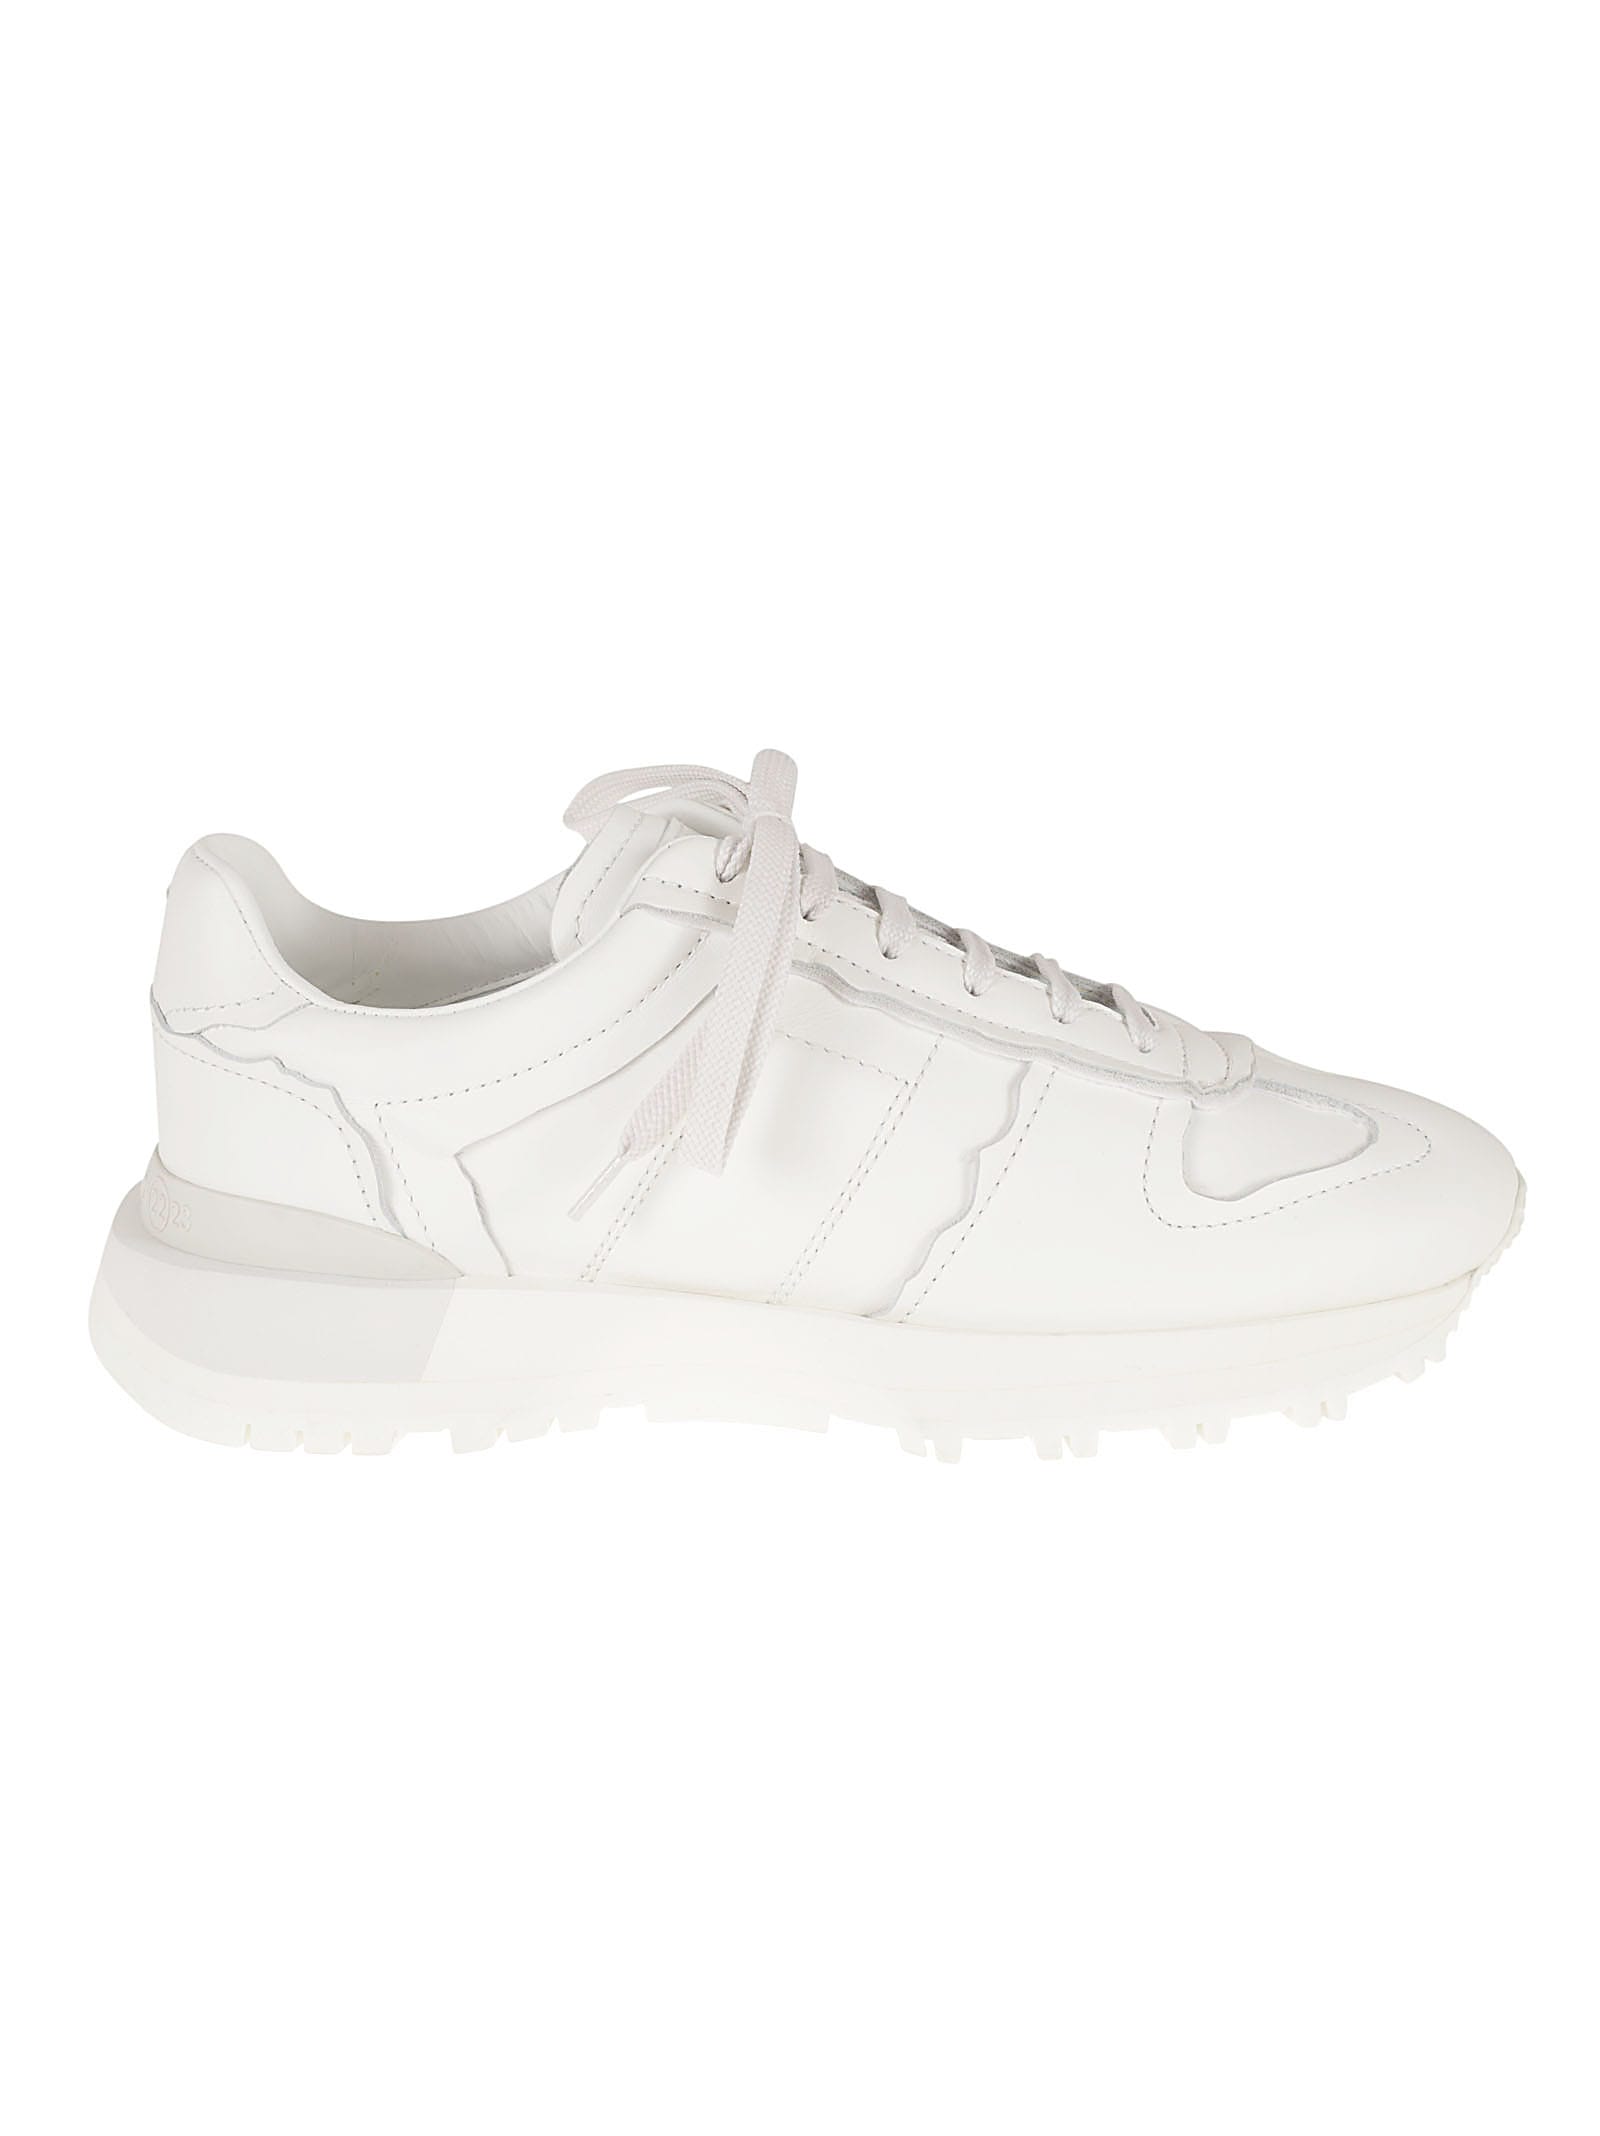 MAISON MARGIELA CLASSIC FITTED LACE-UP SNEAKERS